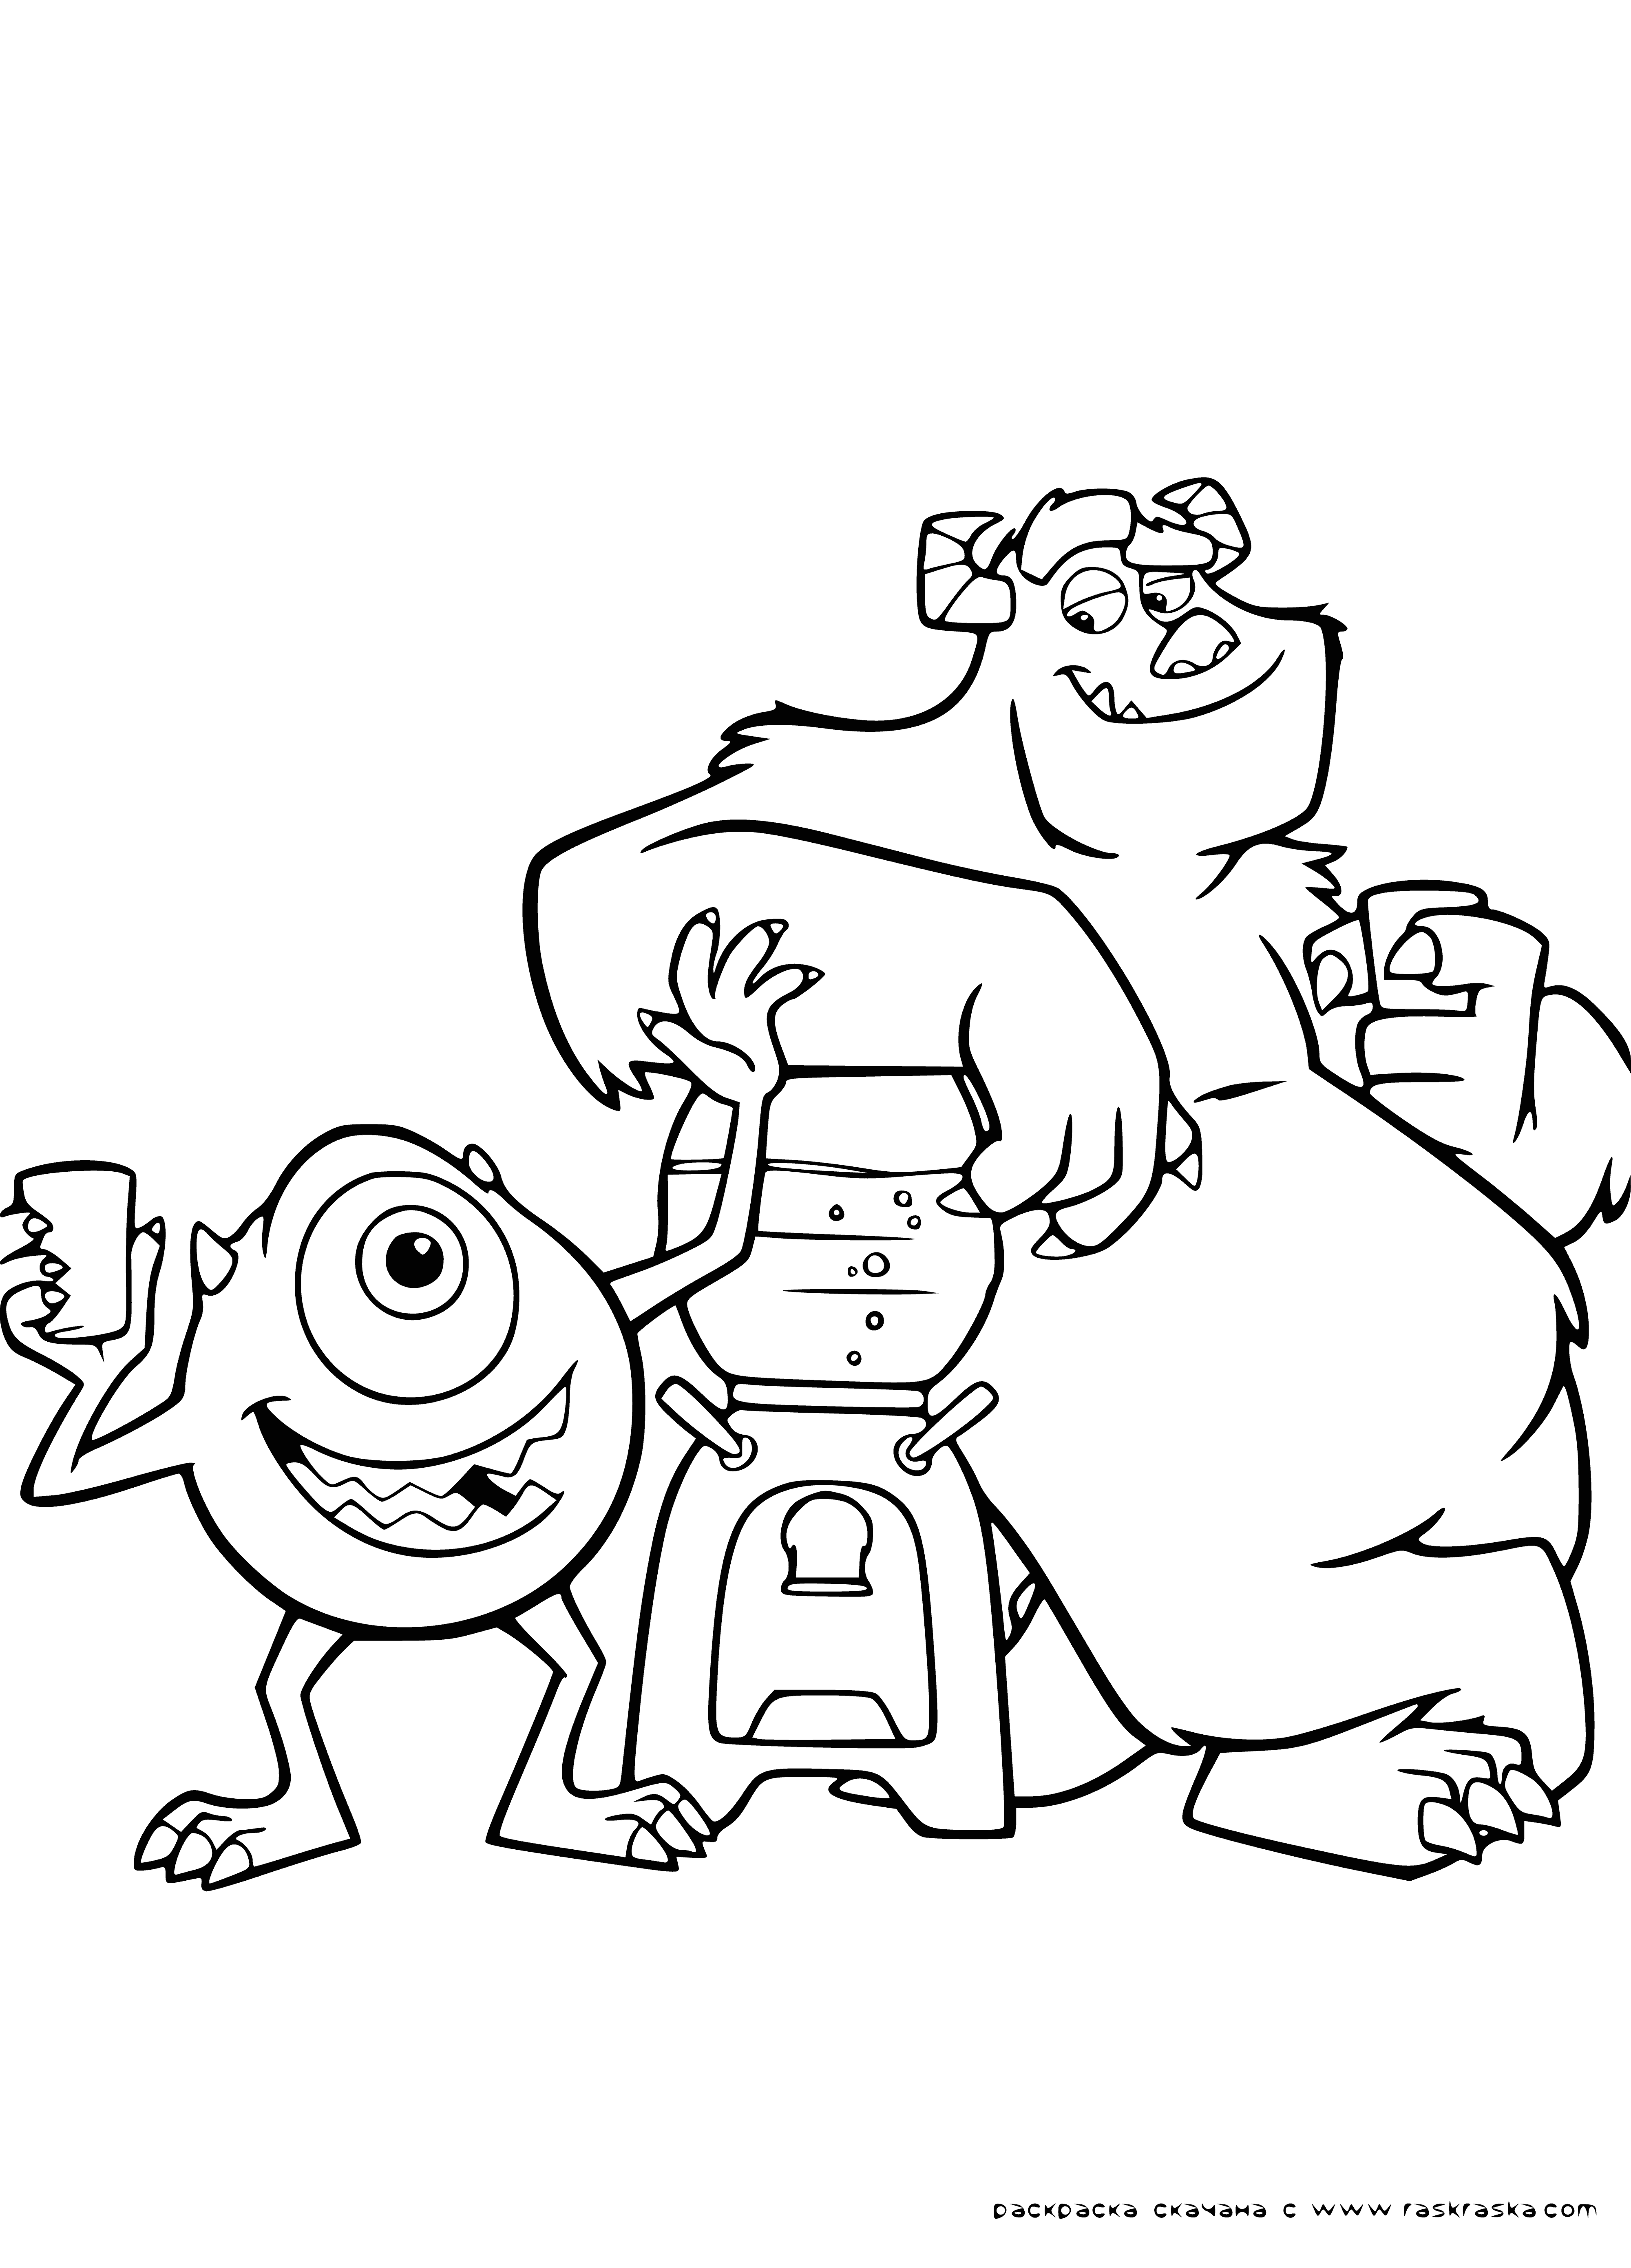 Mike and Sally coloring page